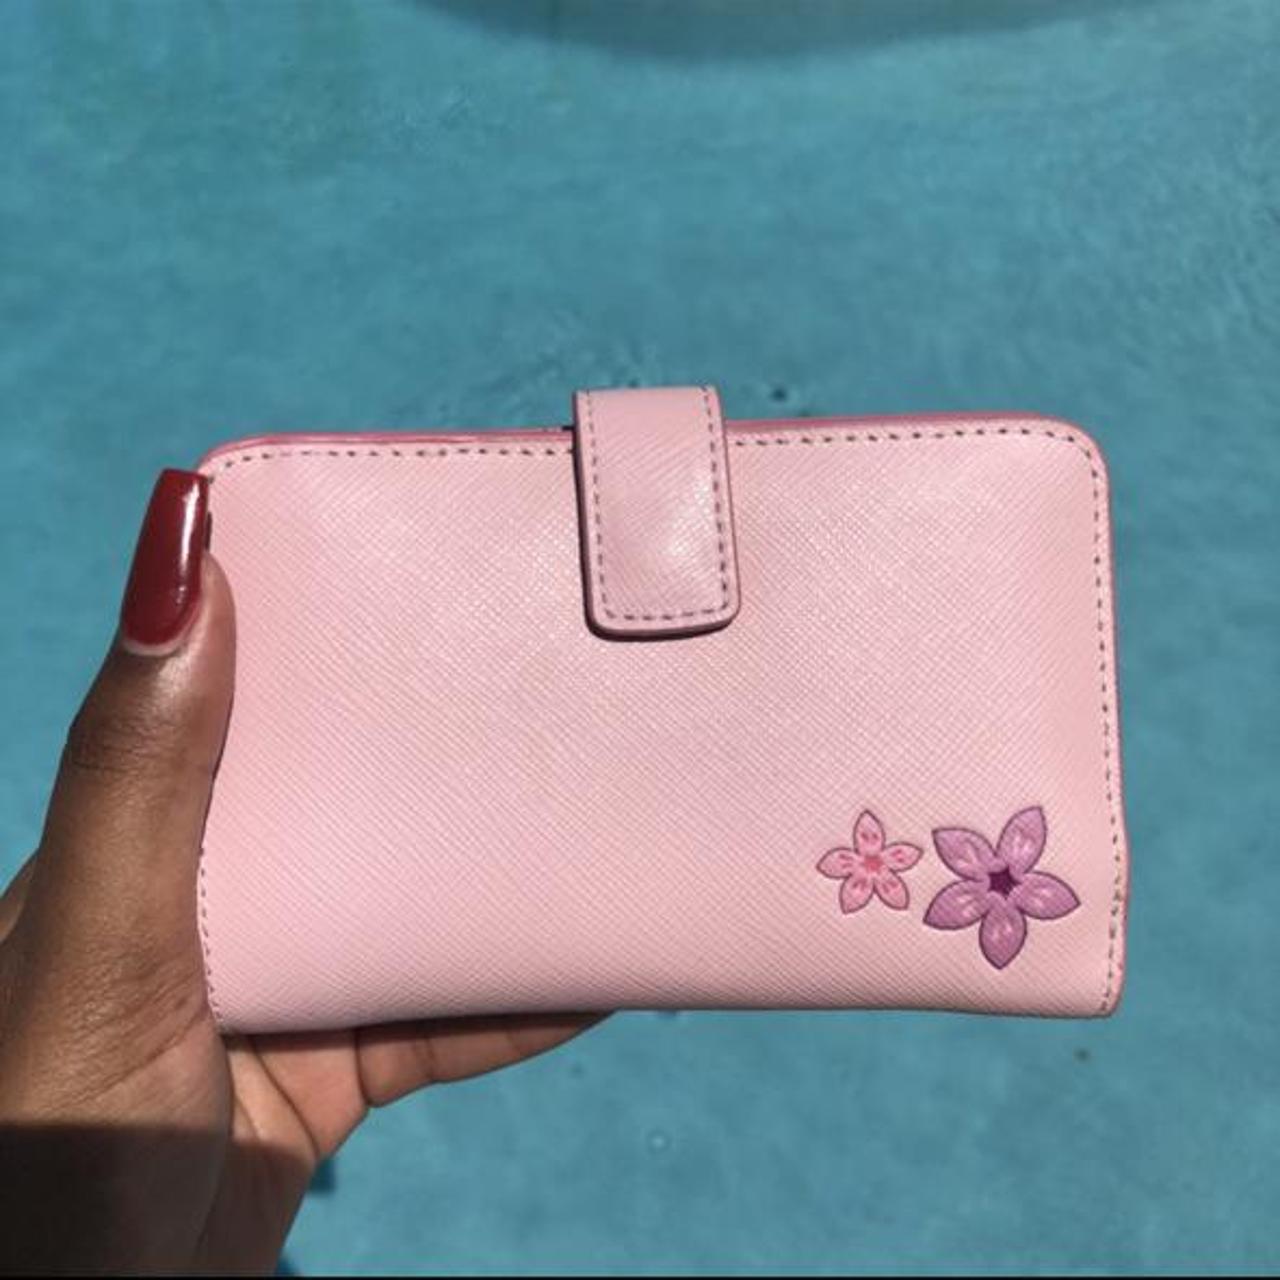 Kate Spade Hawaii Compact Wallet with Floral...